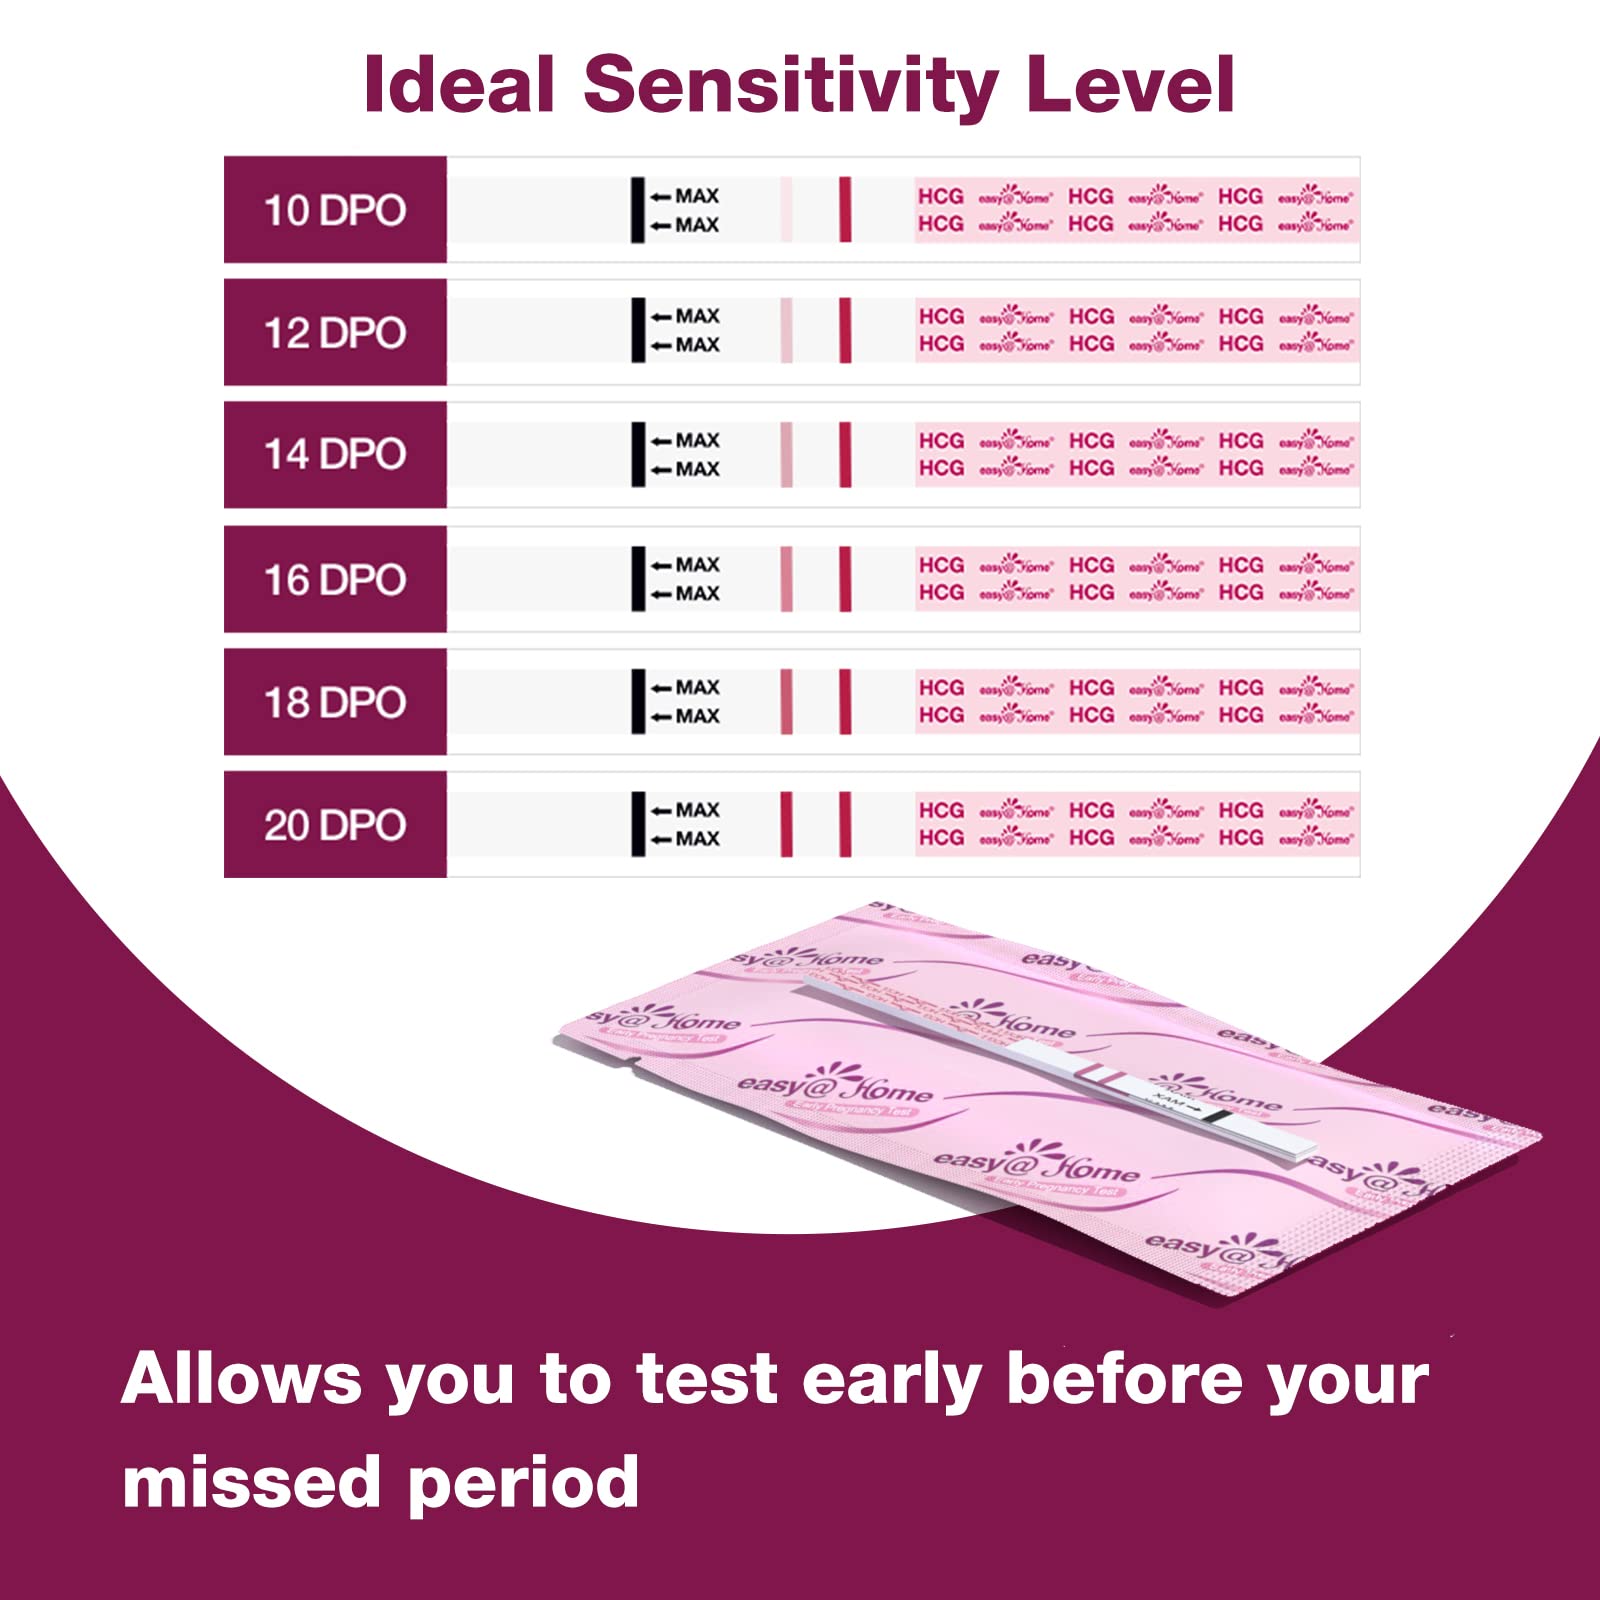 Easy@Home Pregnancy Test Strips Kit, Powered by Premom Ovulation Predictor iOS and Android APP, 20 HCG Tests